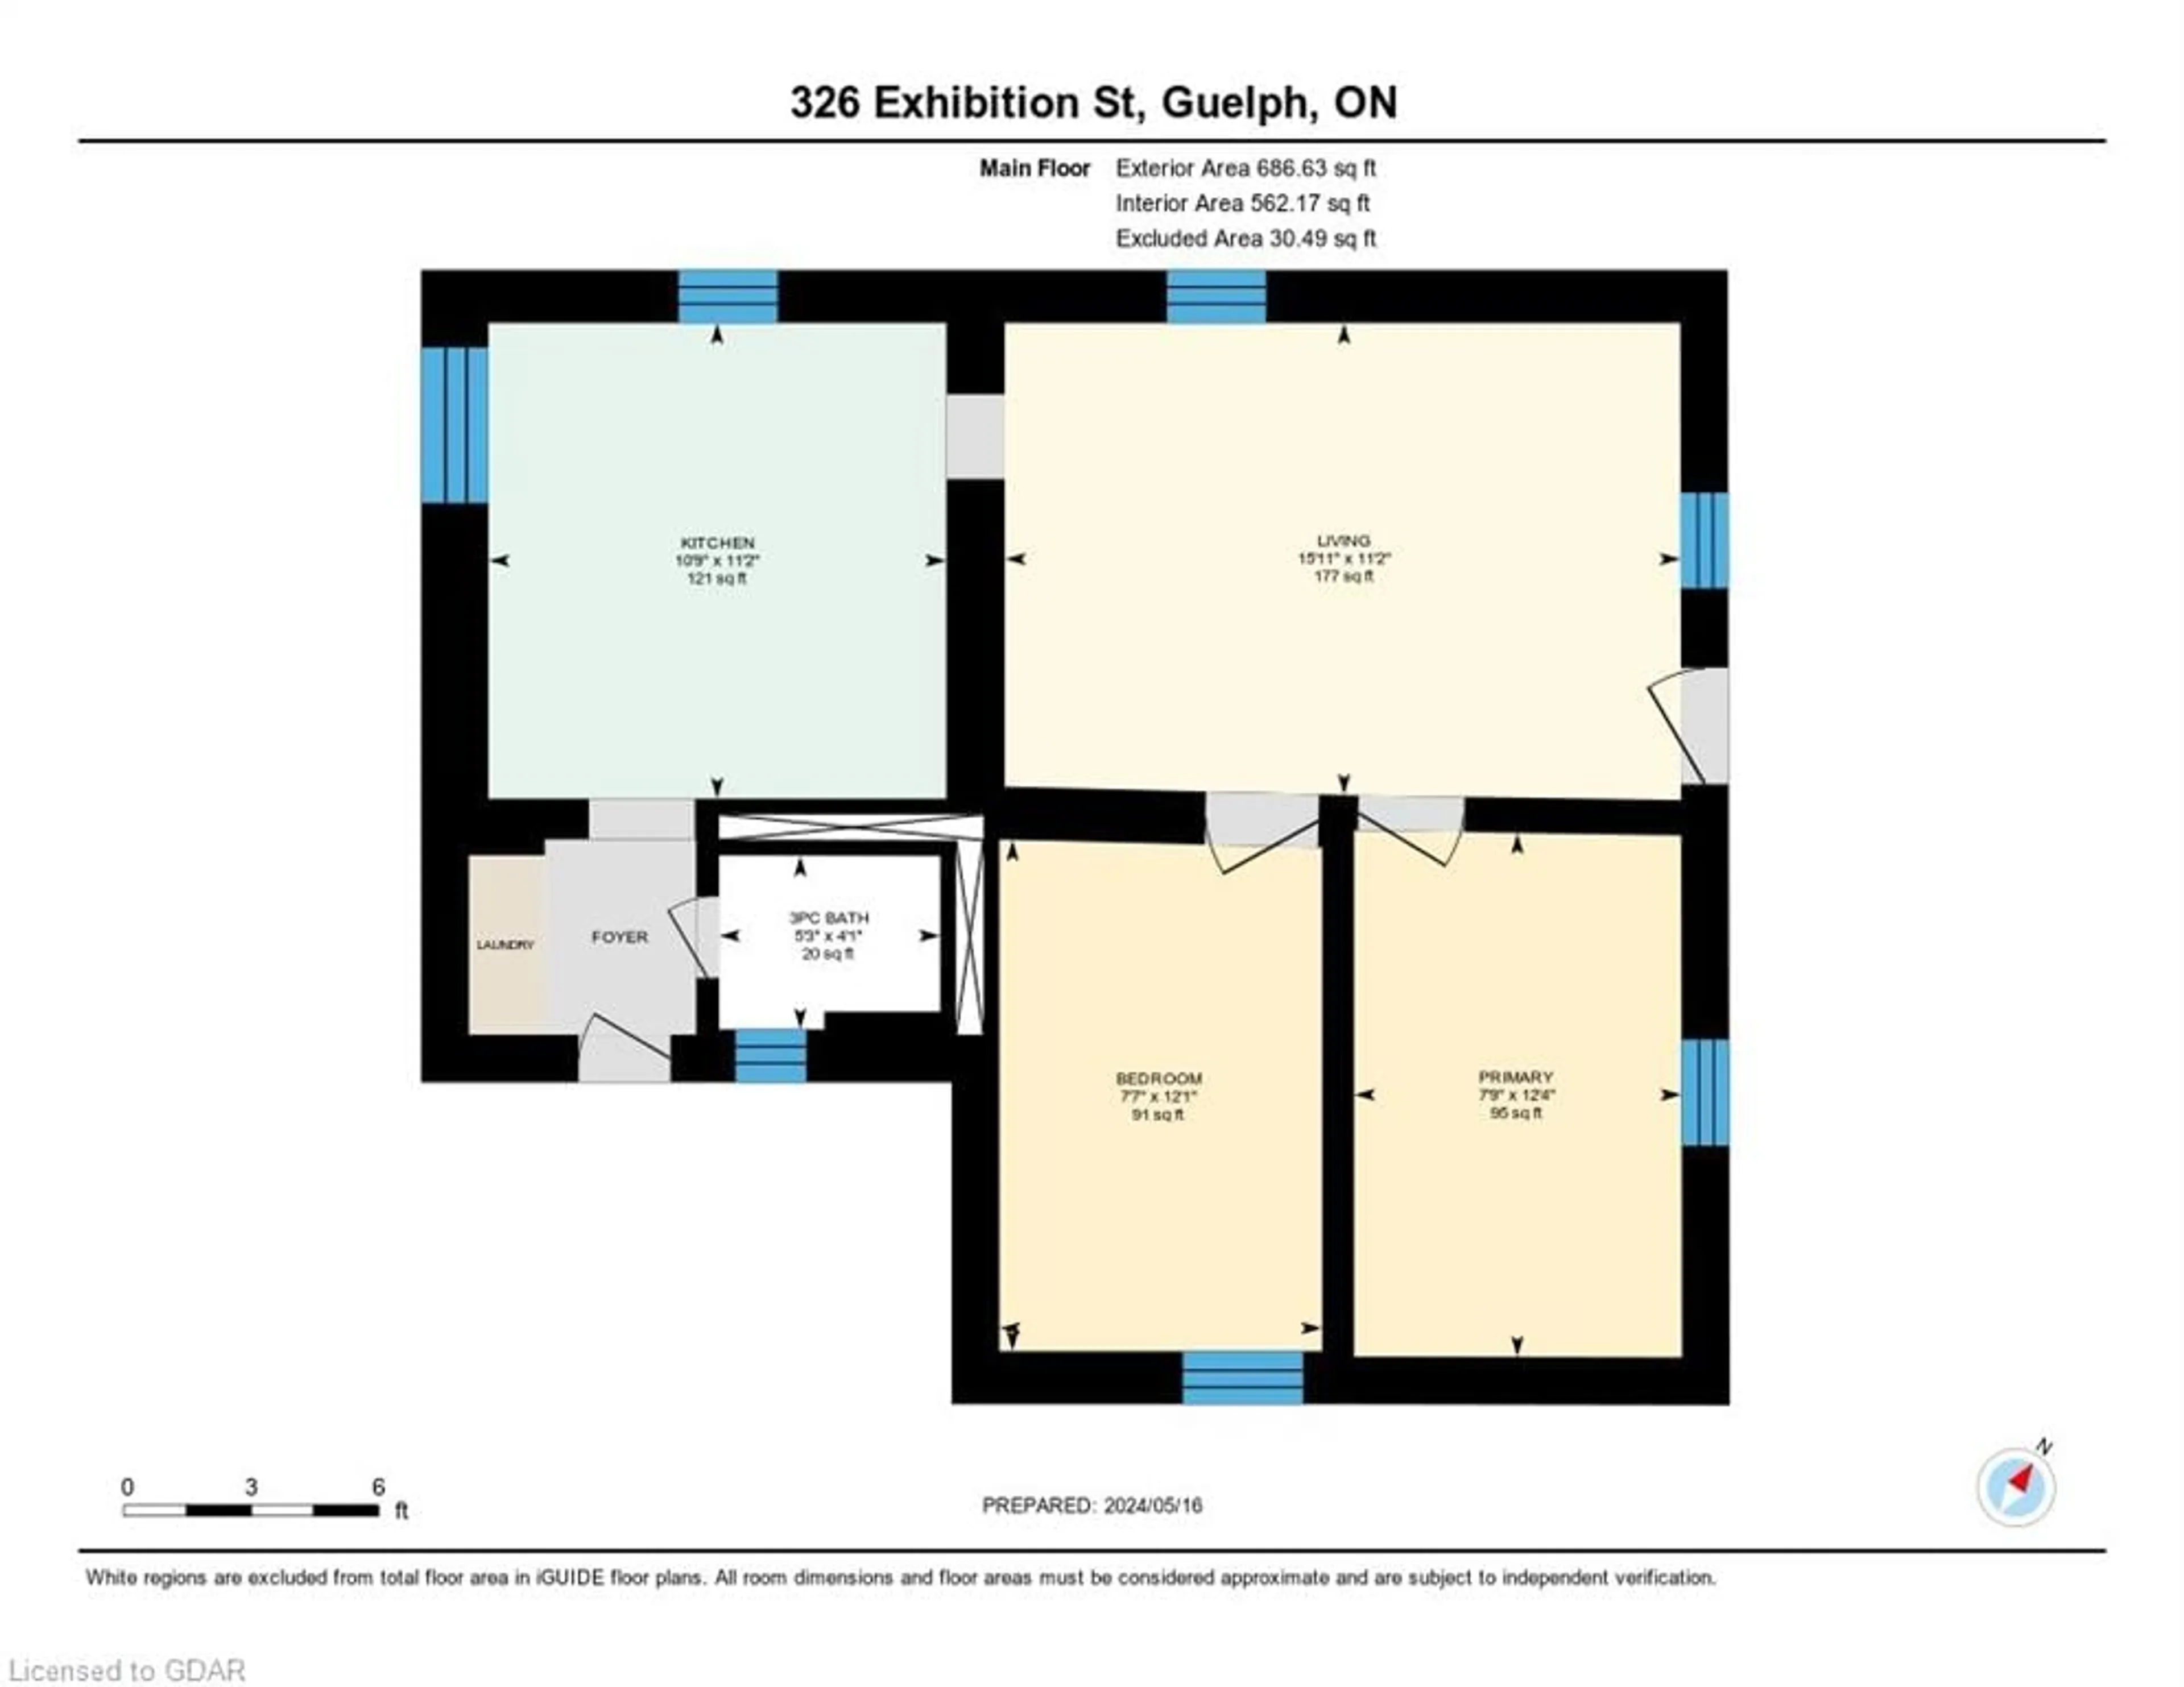 Floor plan for 326 Exhibition St, Guelph Ontario N1H 4S2